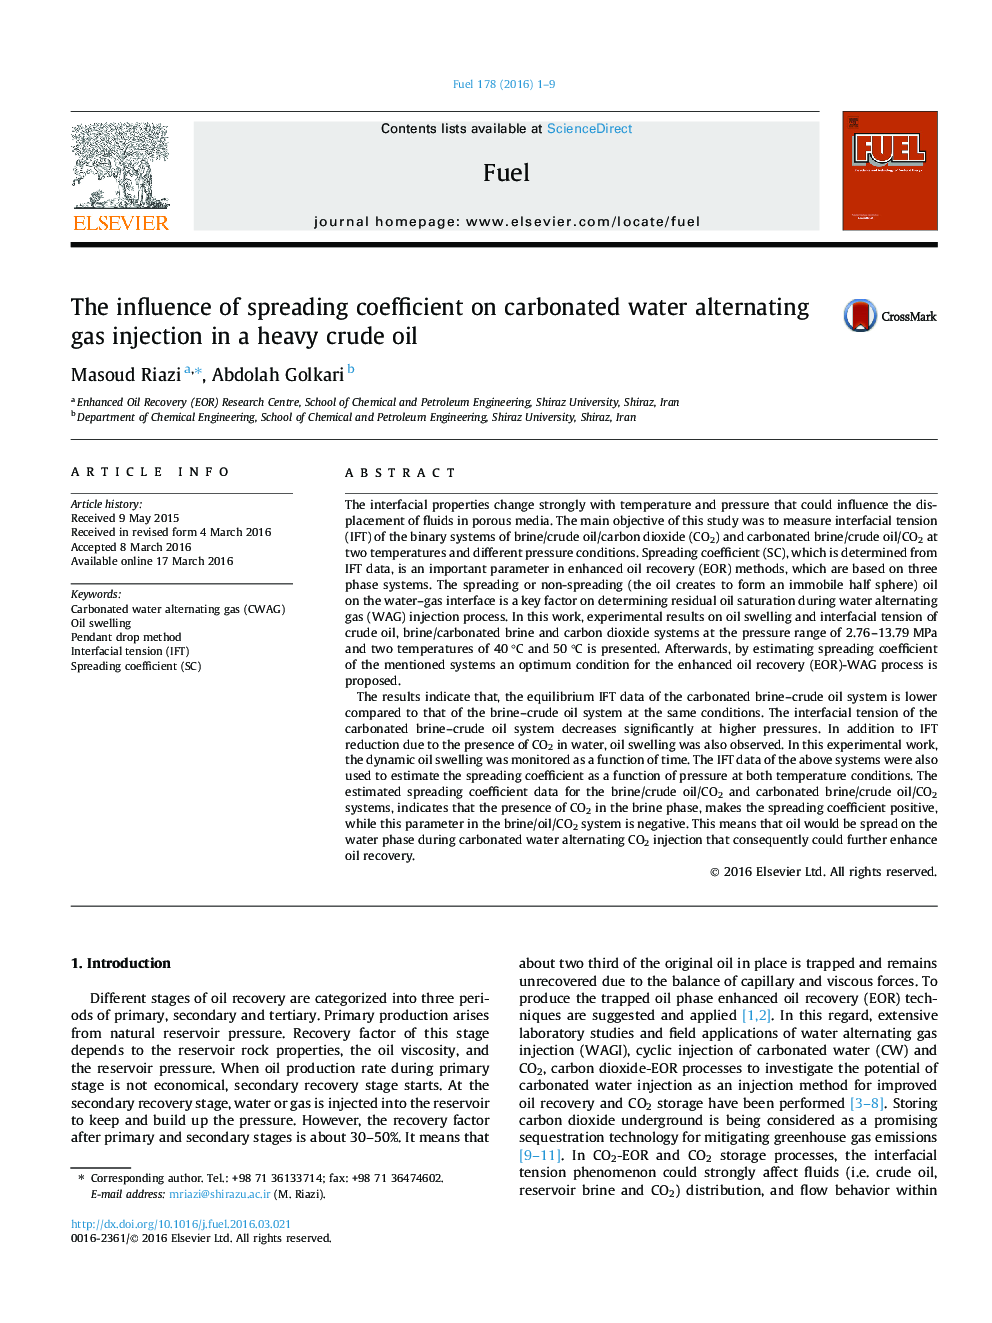 The influence of spreading coefficient on carbonated water alternating gas injection in a heavy crude oil